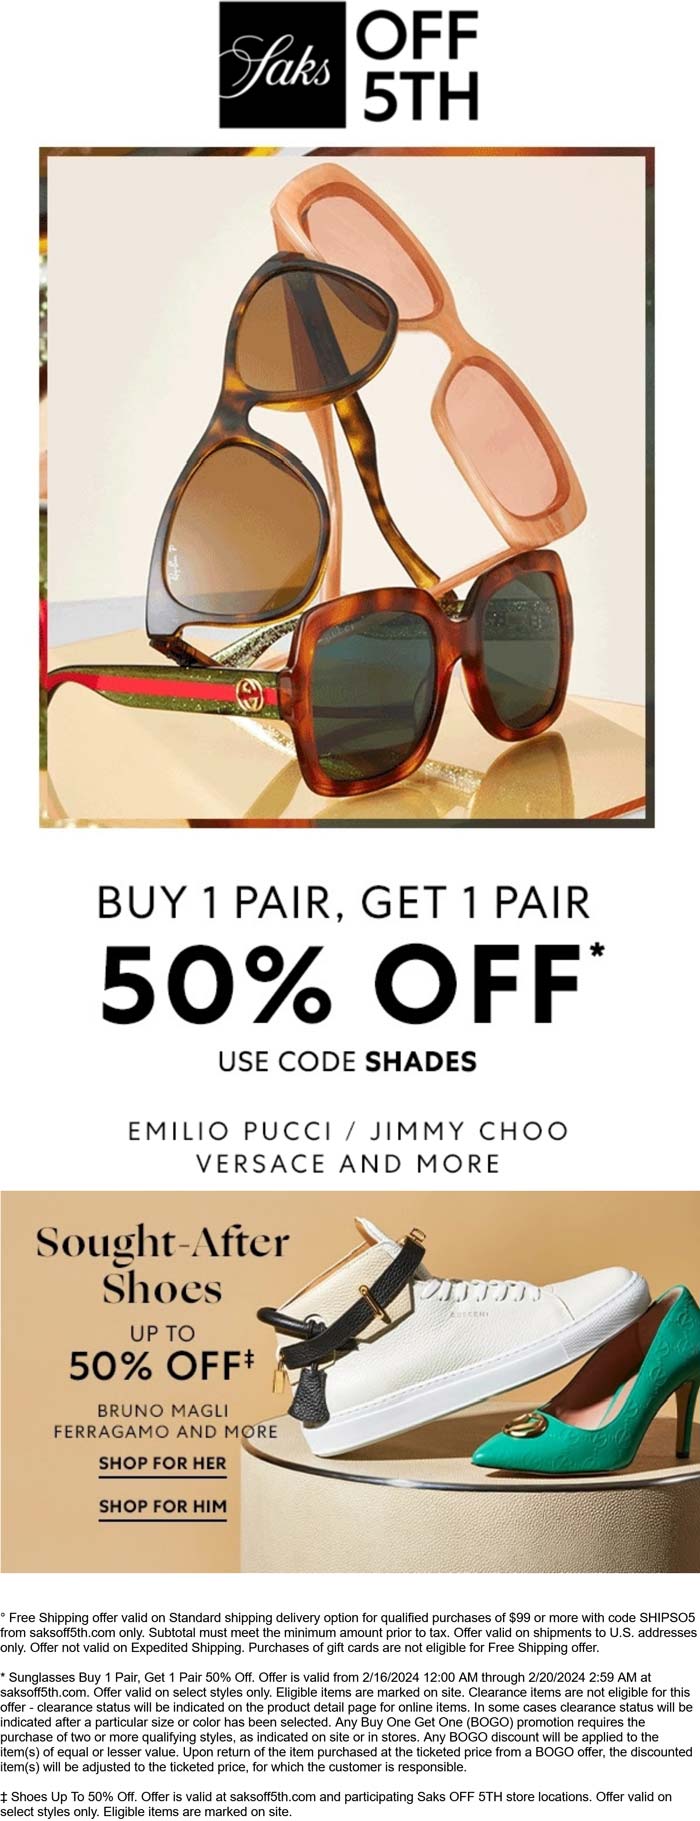 Saks OFF 5TH stores Coupon  Second pair designer sunglasses 50% off today at Saks OFF 5TH via promo code SHADES #saksoff5th 